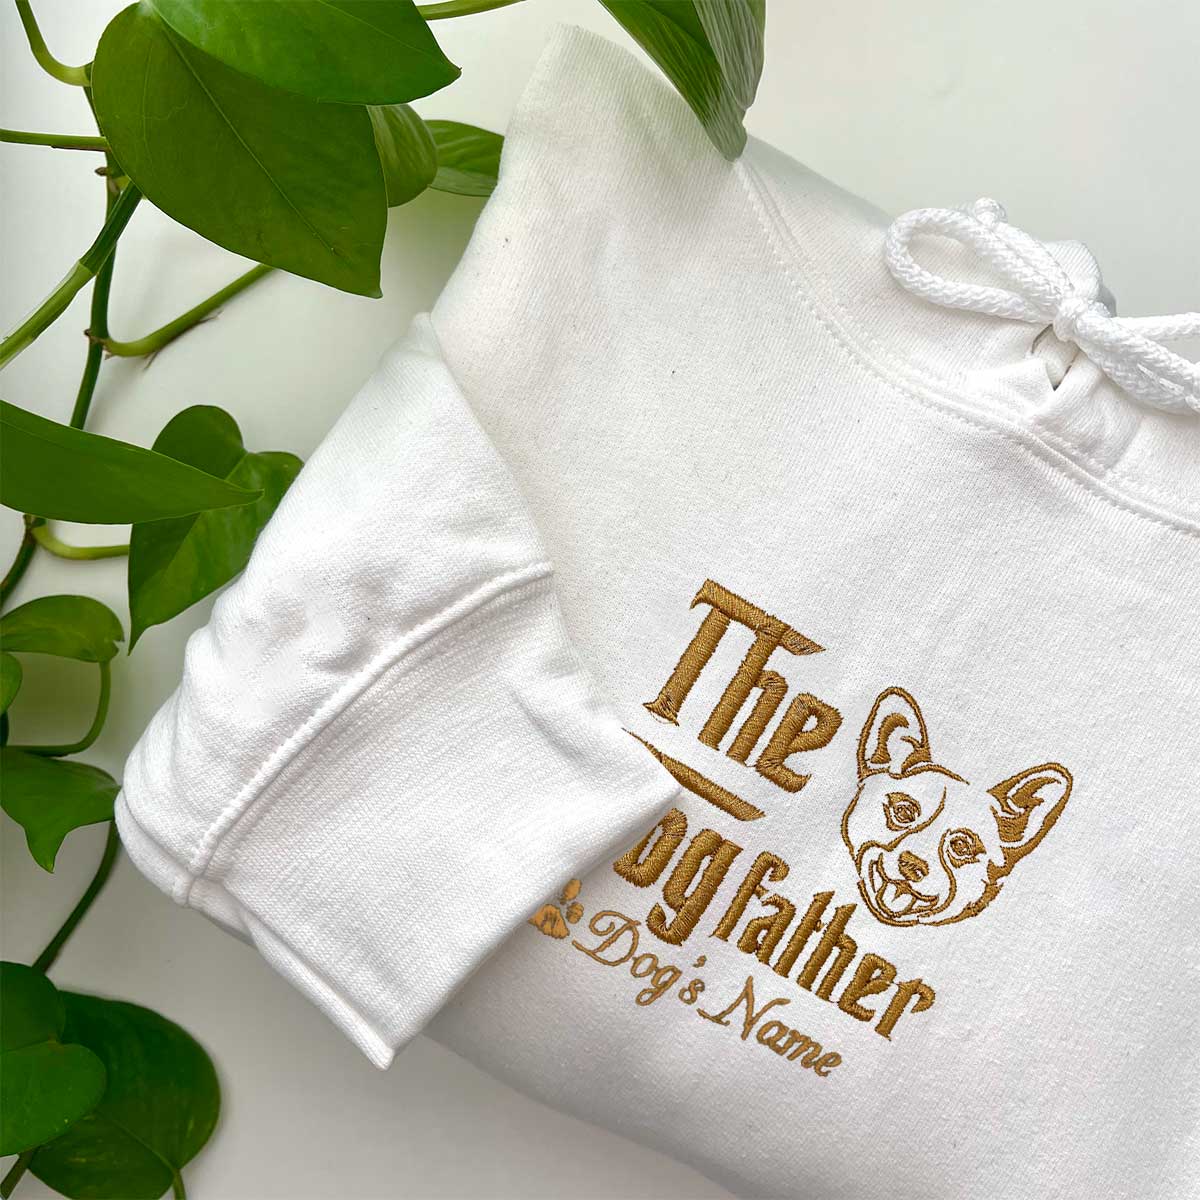 Custom Corgi Dog Dad Embroidered Hoodie, Personalized The DogFather Hoodie Corgi, Best Gifts For Corgi Lovers